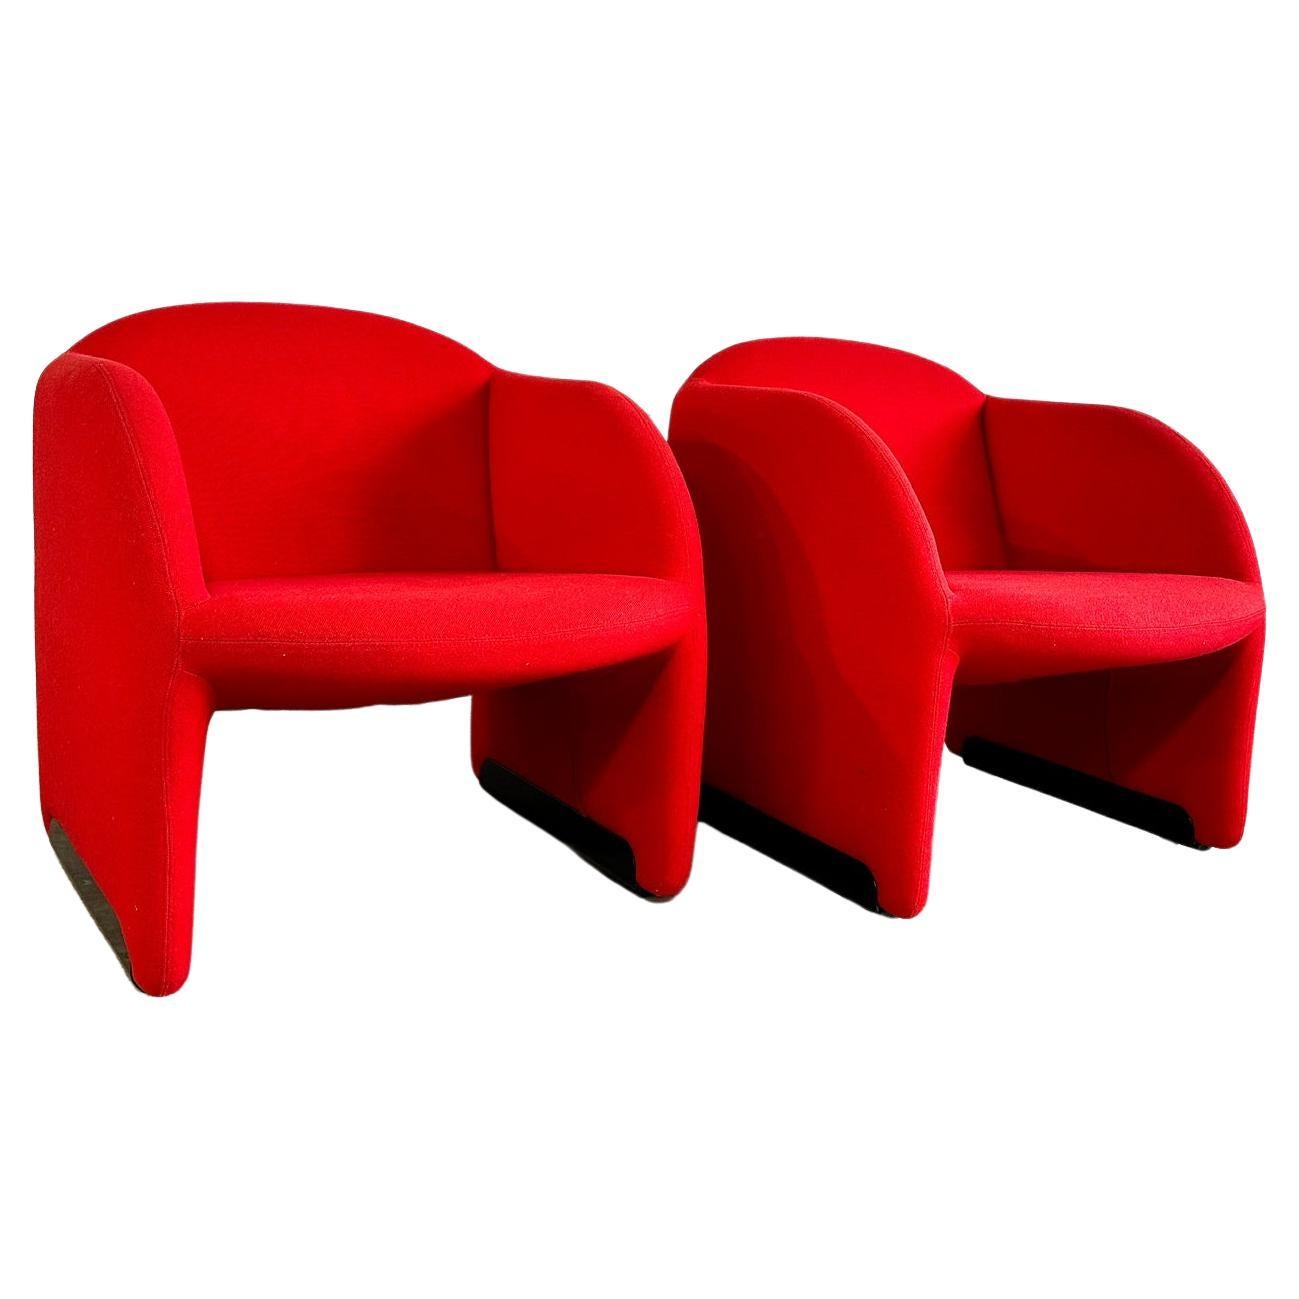 Pierre Paulin “Ben” Lounge Chairs for Artifort For Sale